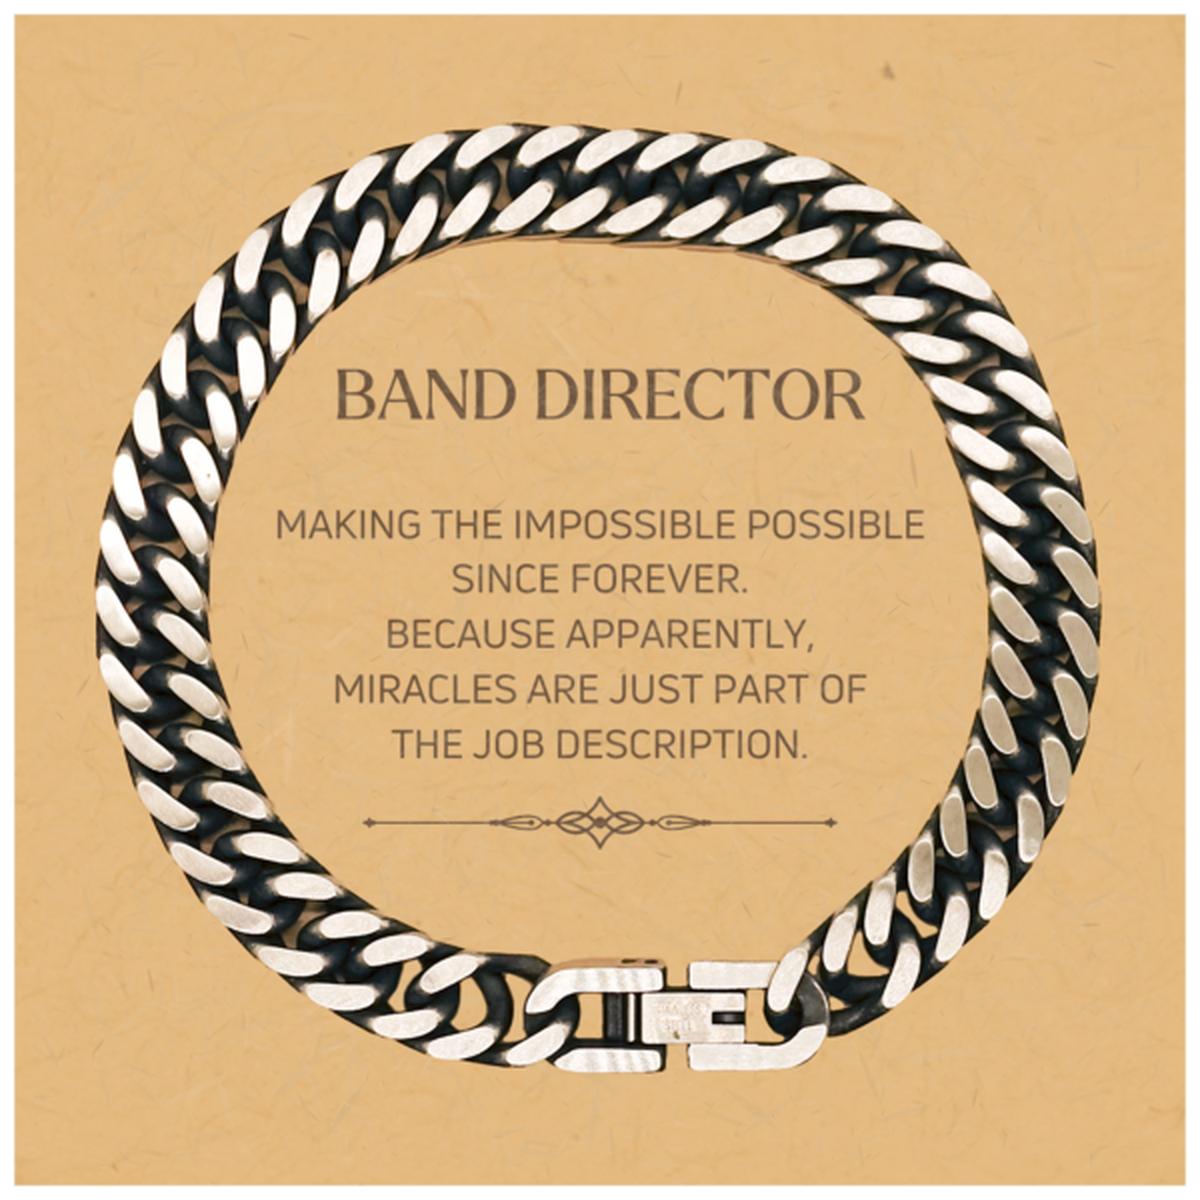 Funny Band Director Gifts, Miracles are just part of the job description, Inspirational Birthday Christmas Cuban Link Chain Bracelet For Band Director, Men, Women, Coworkers, Friends, Boss